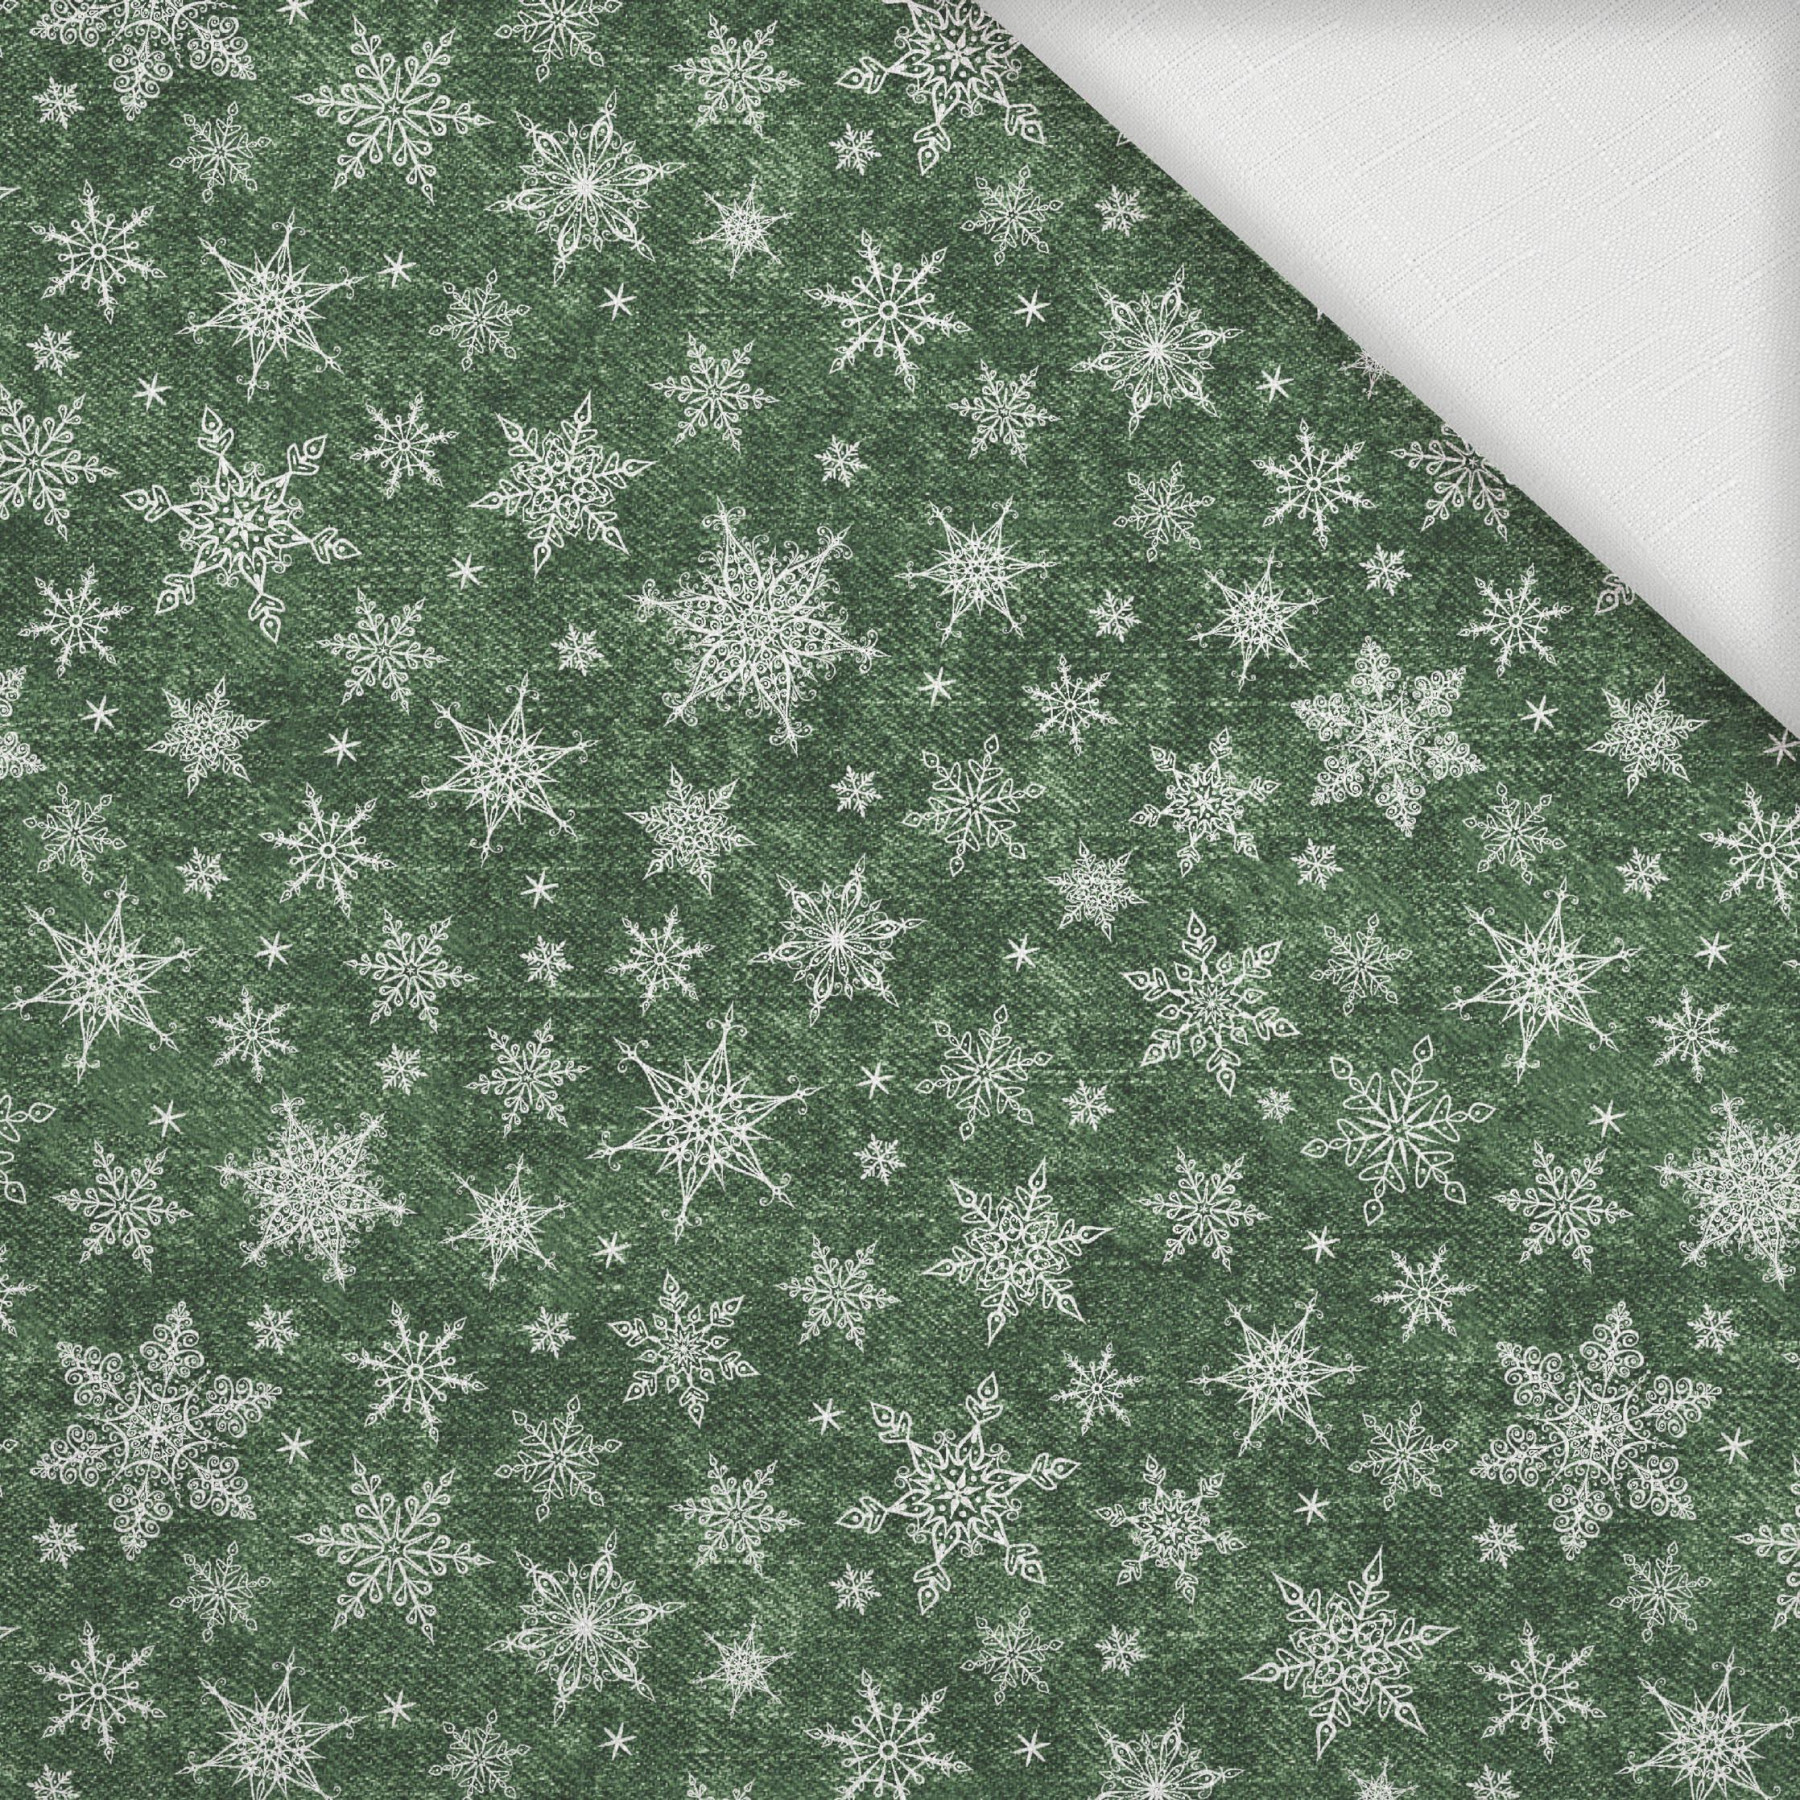 SNOWFLAKES PAT. 2 / ACID WASH BOTTLE GREEN - Woven Fabric for tablecloths